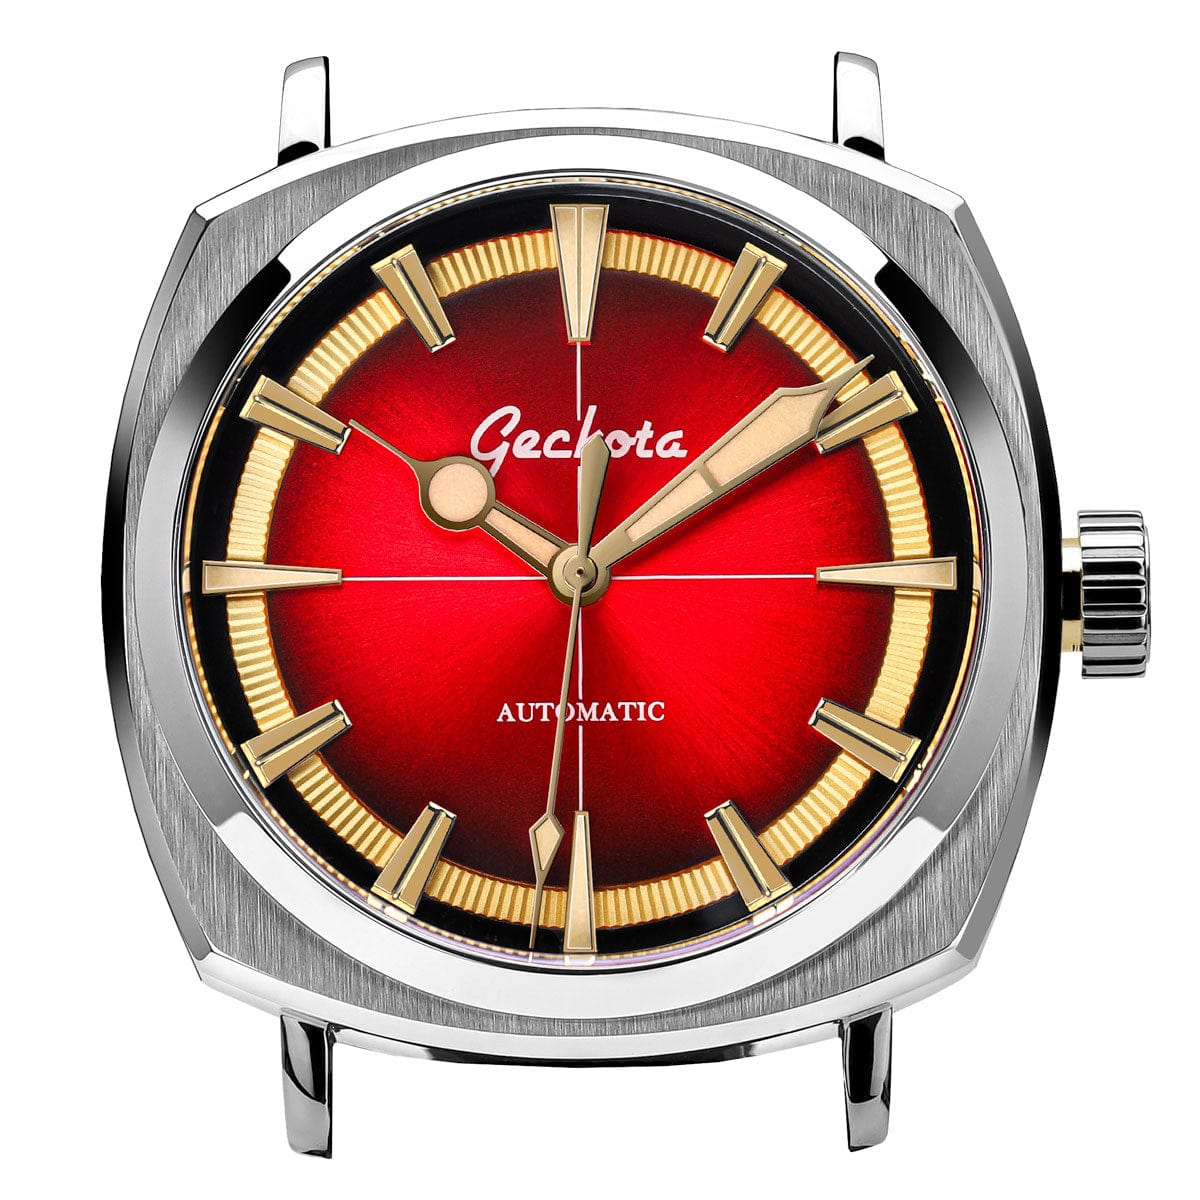 Geckota Pioneer Automatic Watch Arctic Red Edition TP-369-2